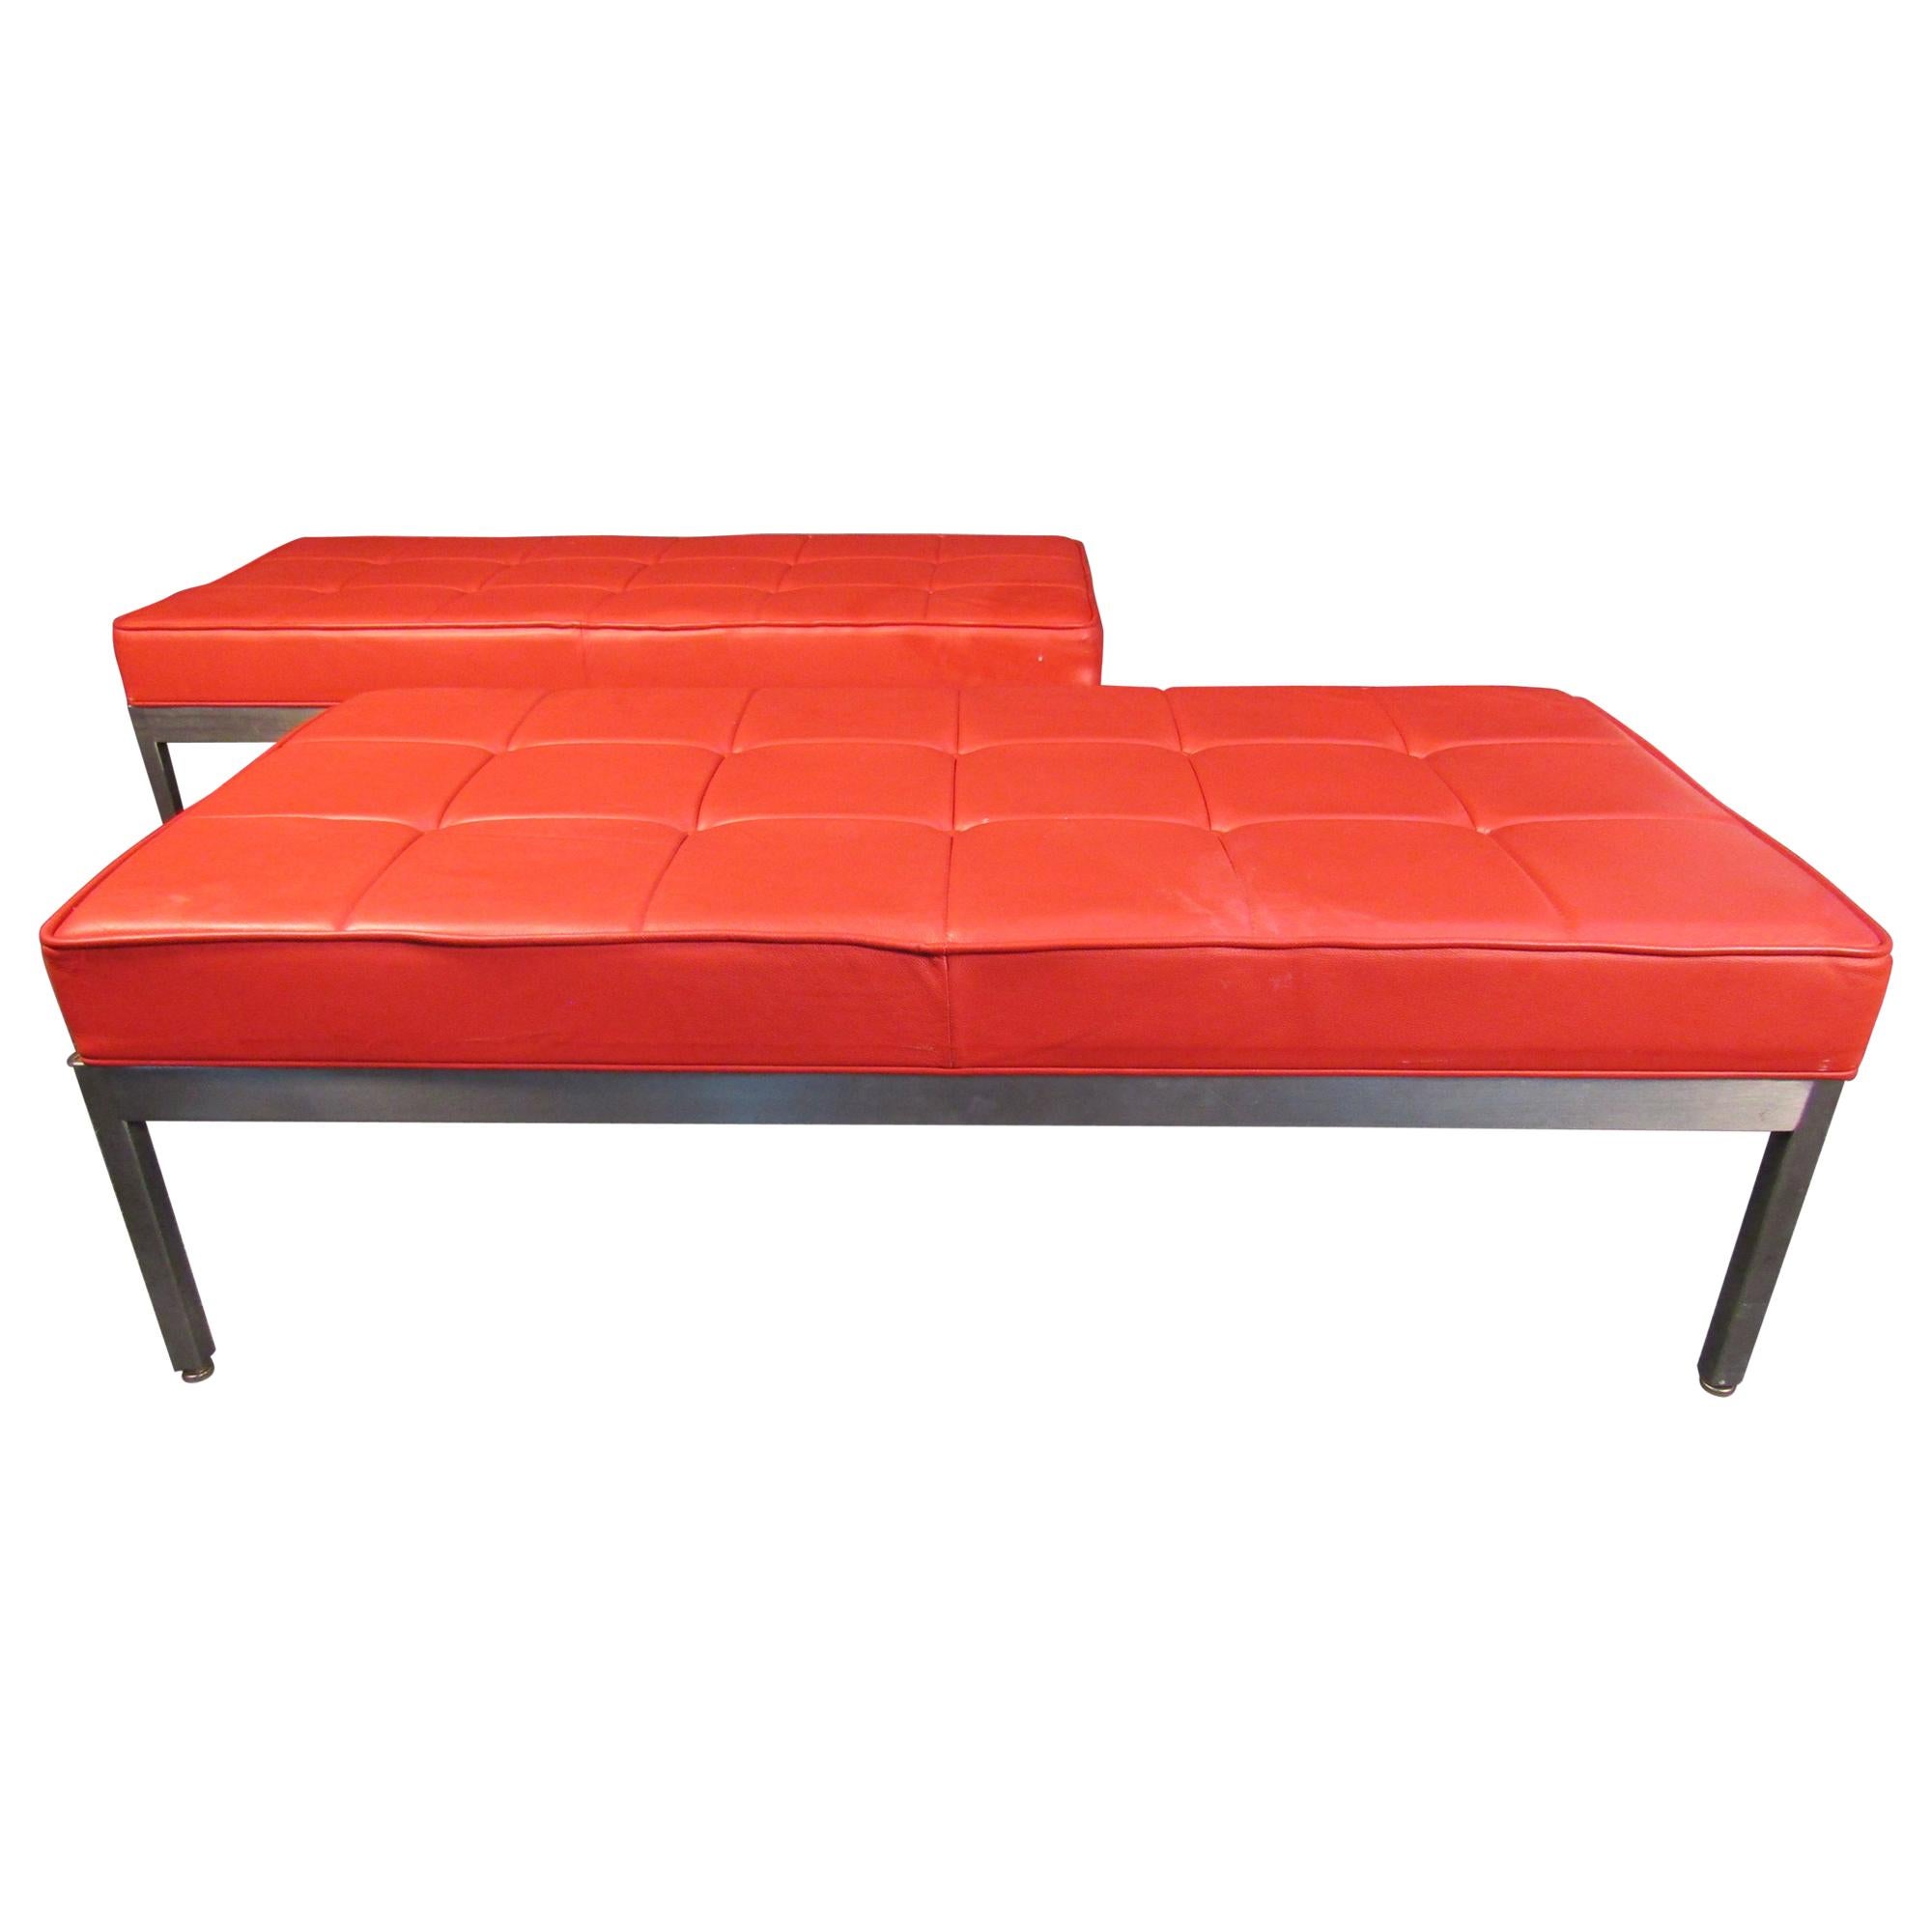 Pair of Red Mid-Century Modern Ottomans For Sale